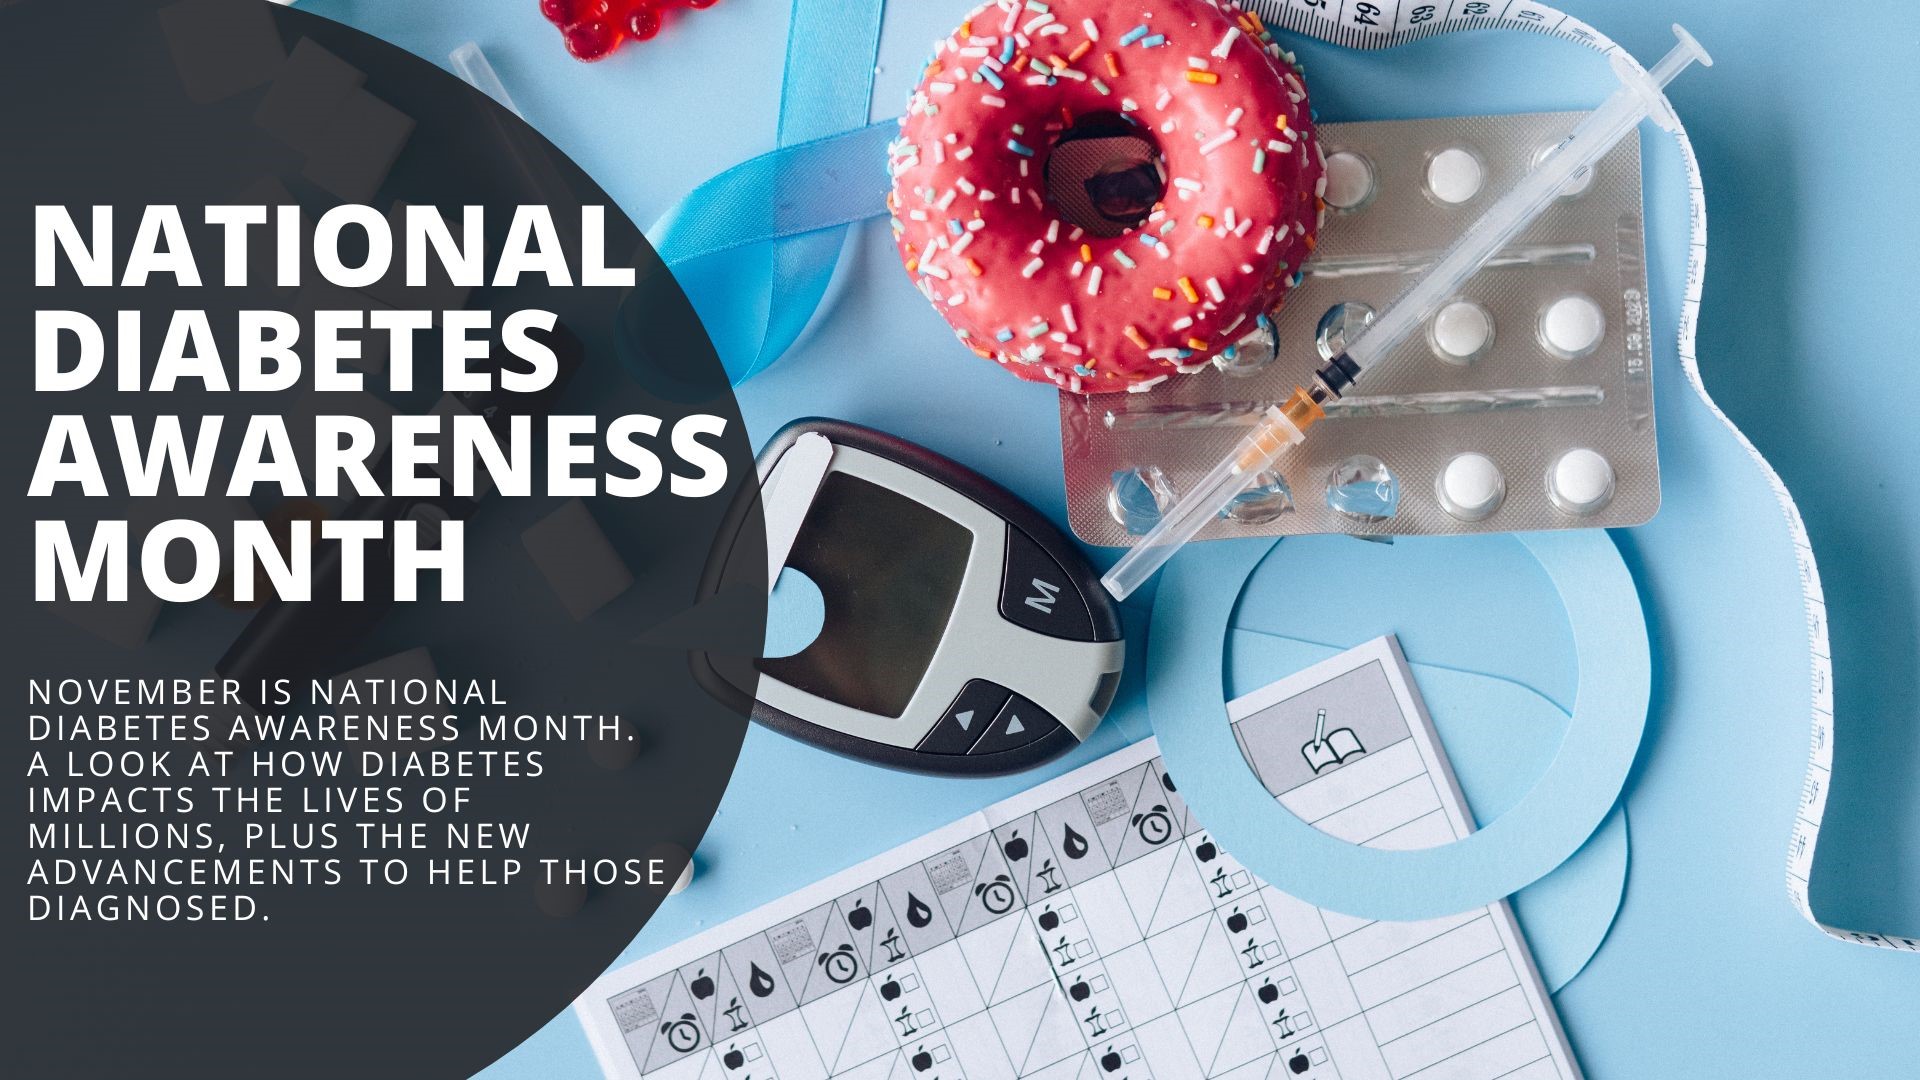 November is National Diabetes Awareness Month. A look at how diabetes impacts the lives of millions, plus the new advancements to help those diagnosed.